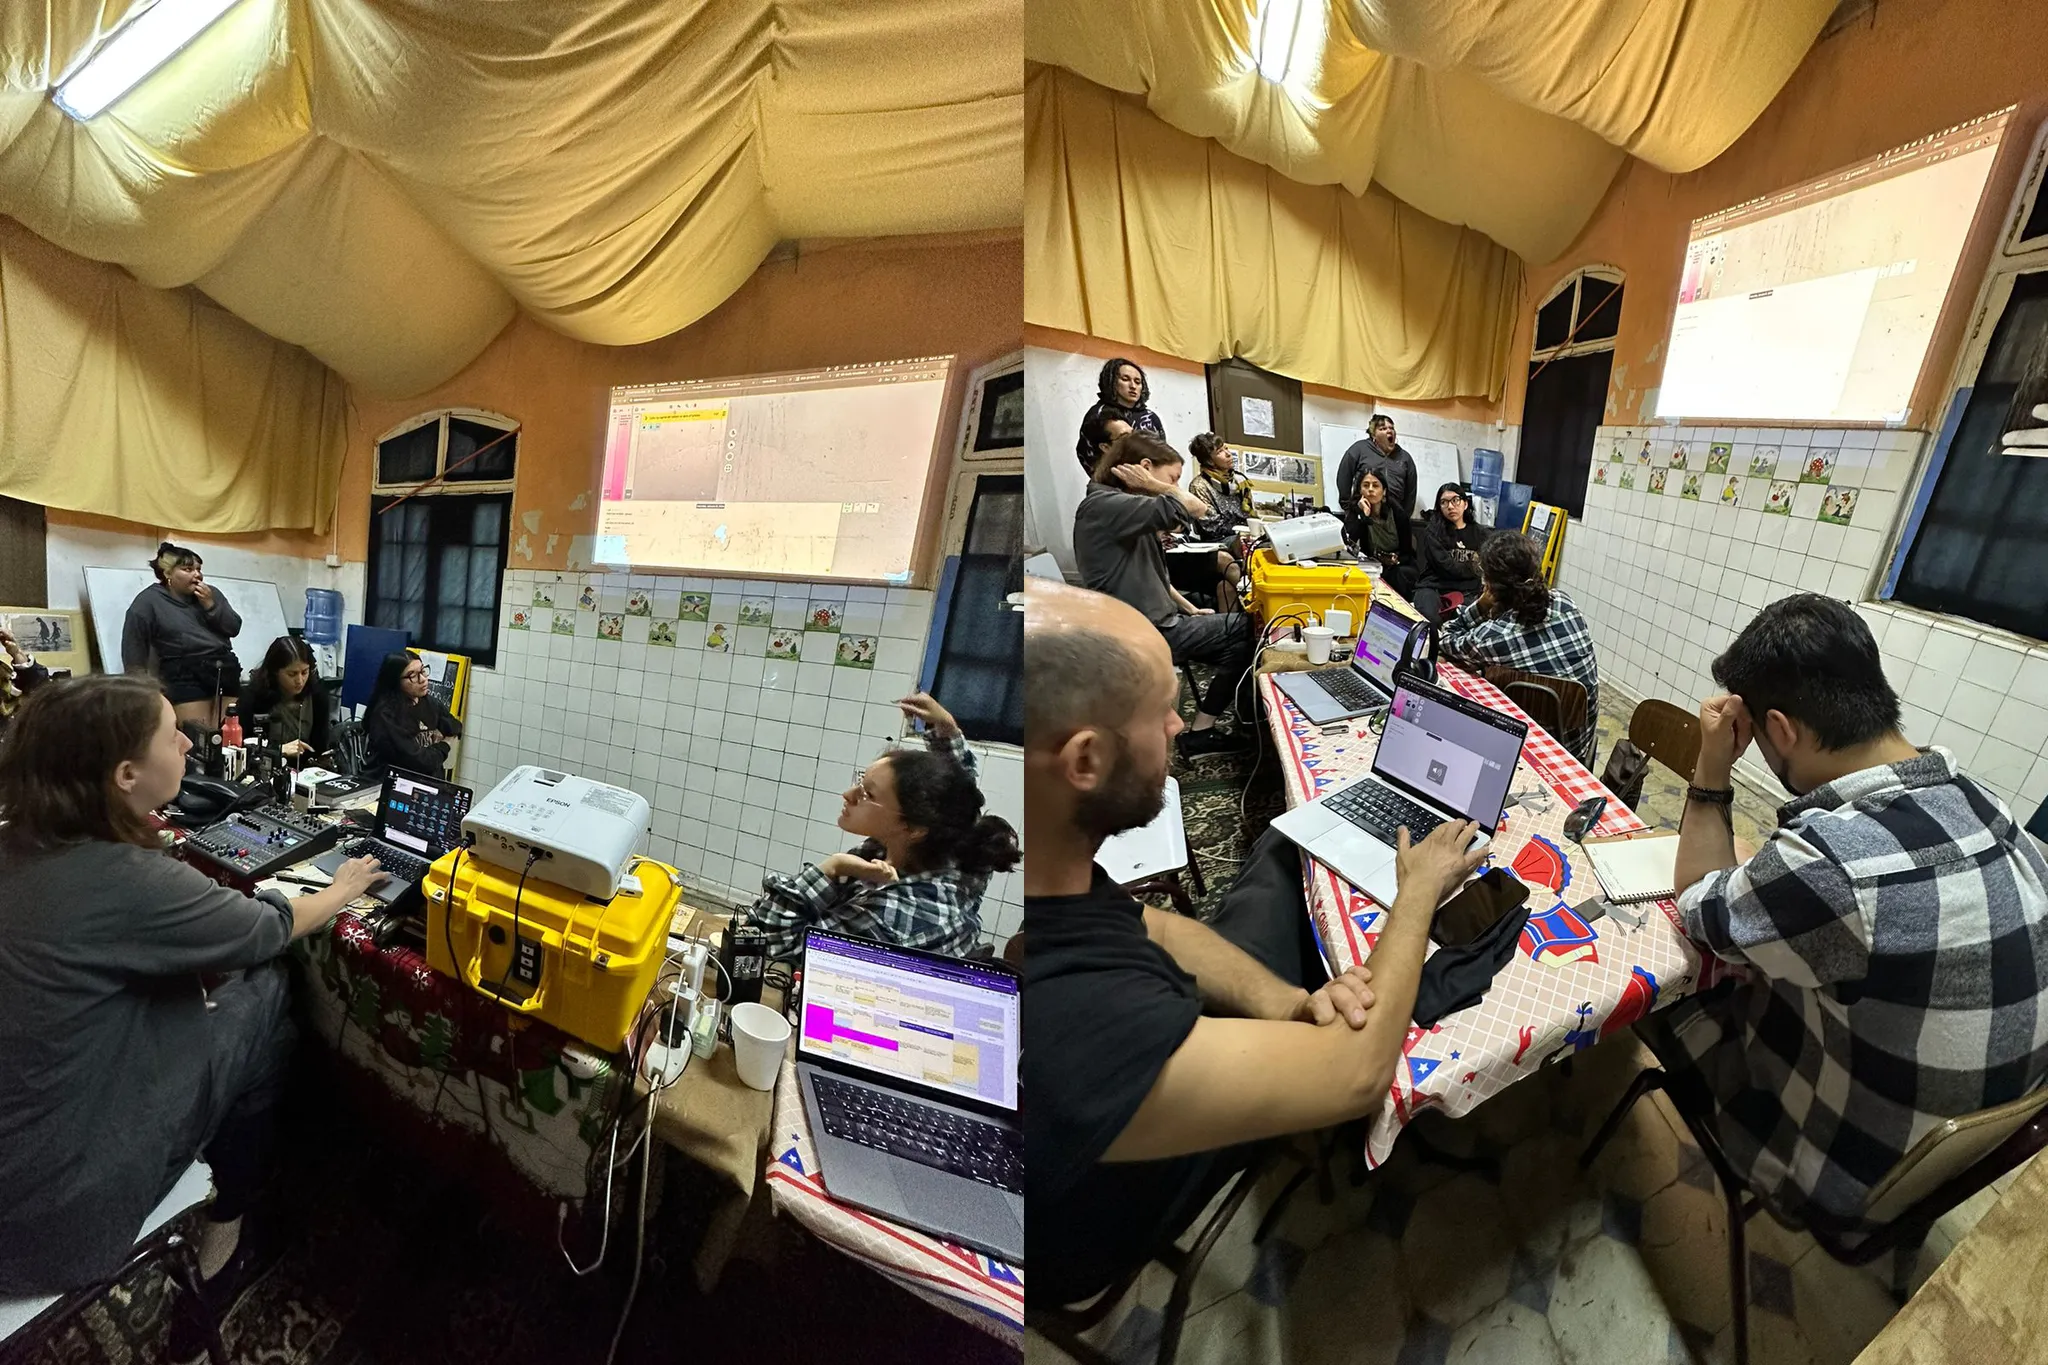 Two pictures. On the left, a white woman with shoulder length brown hair shows mezcal on a laptop with a projection of the screen above. Four women look at her and the screen. On the right,  a white man with short balding hair looks at mezcal on his laptop with a man to his right and the other five women on the long end of a table.